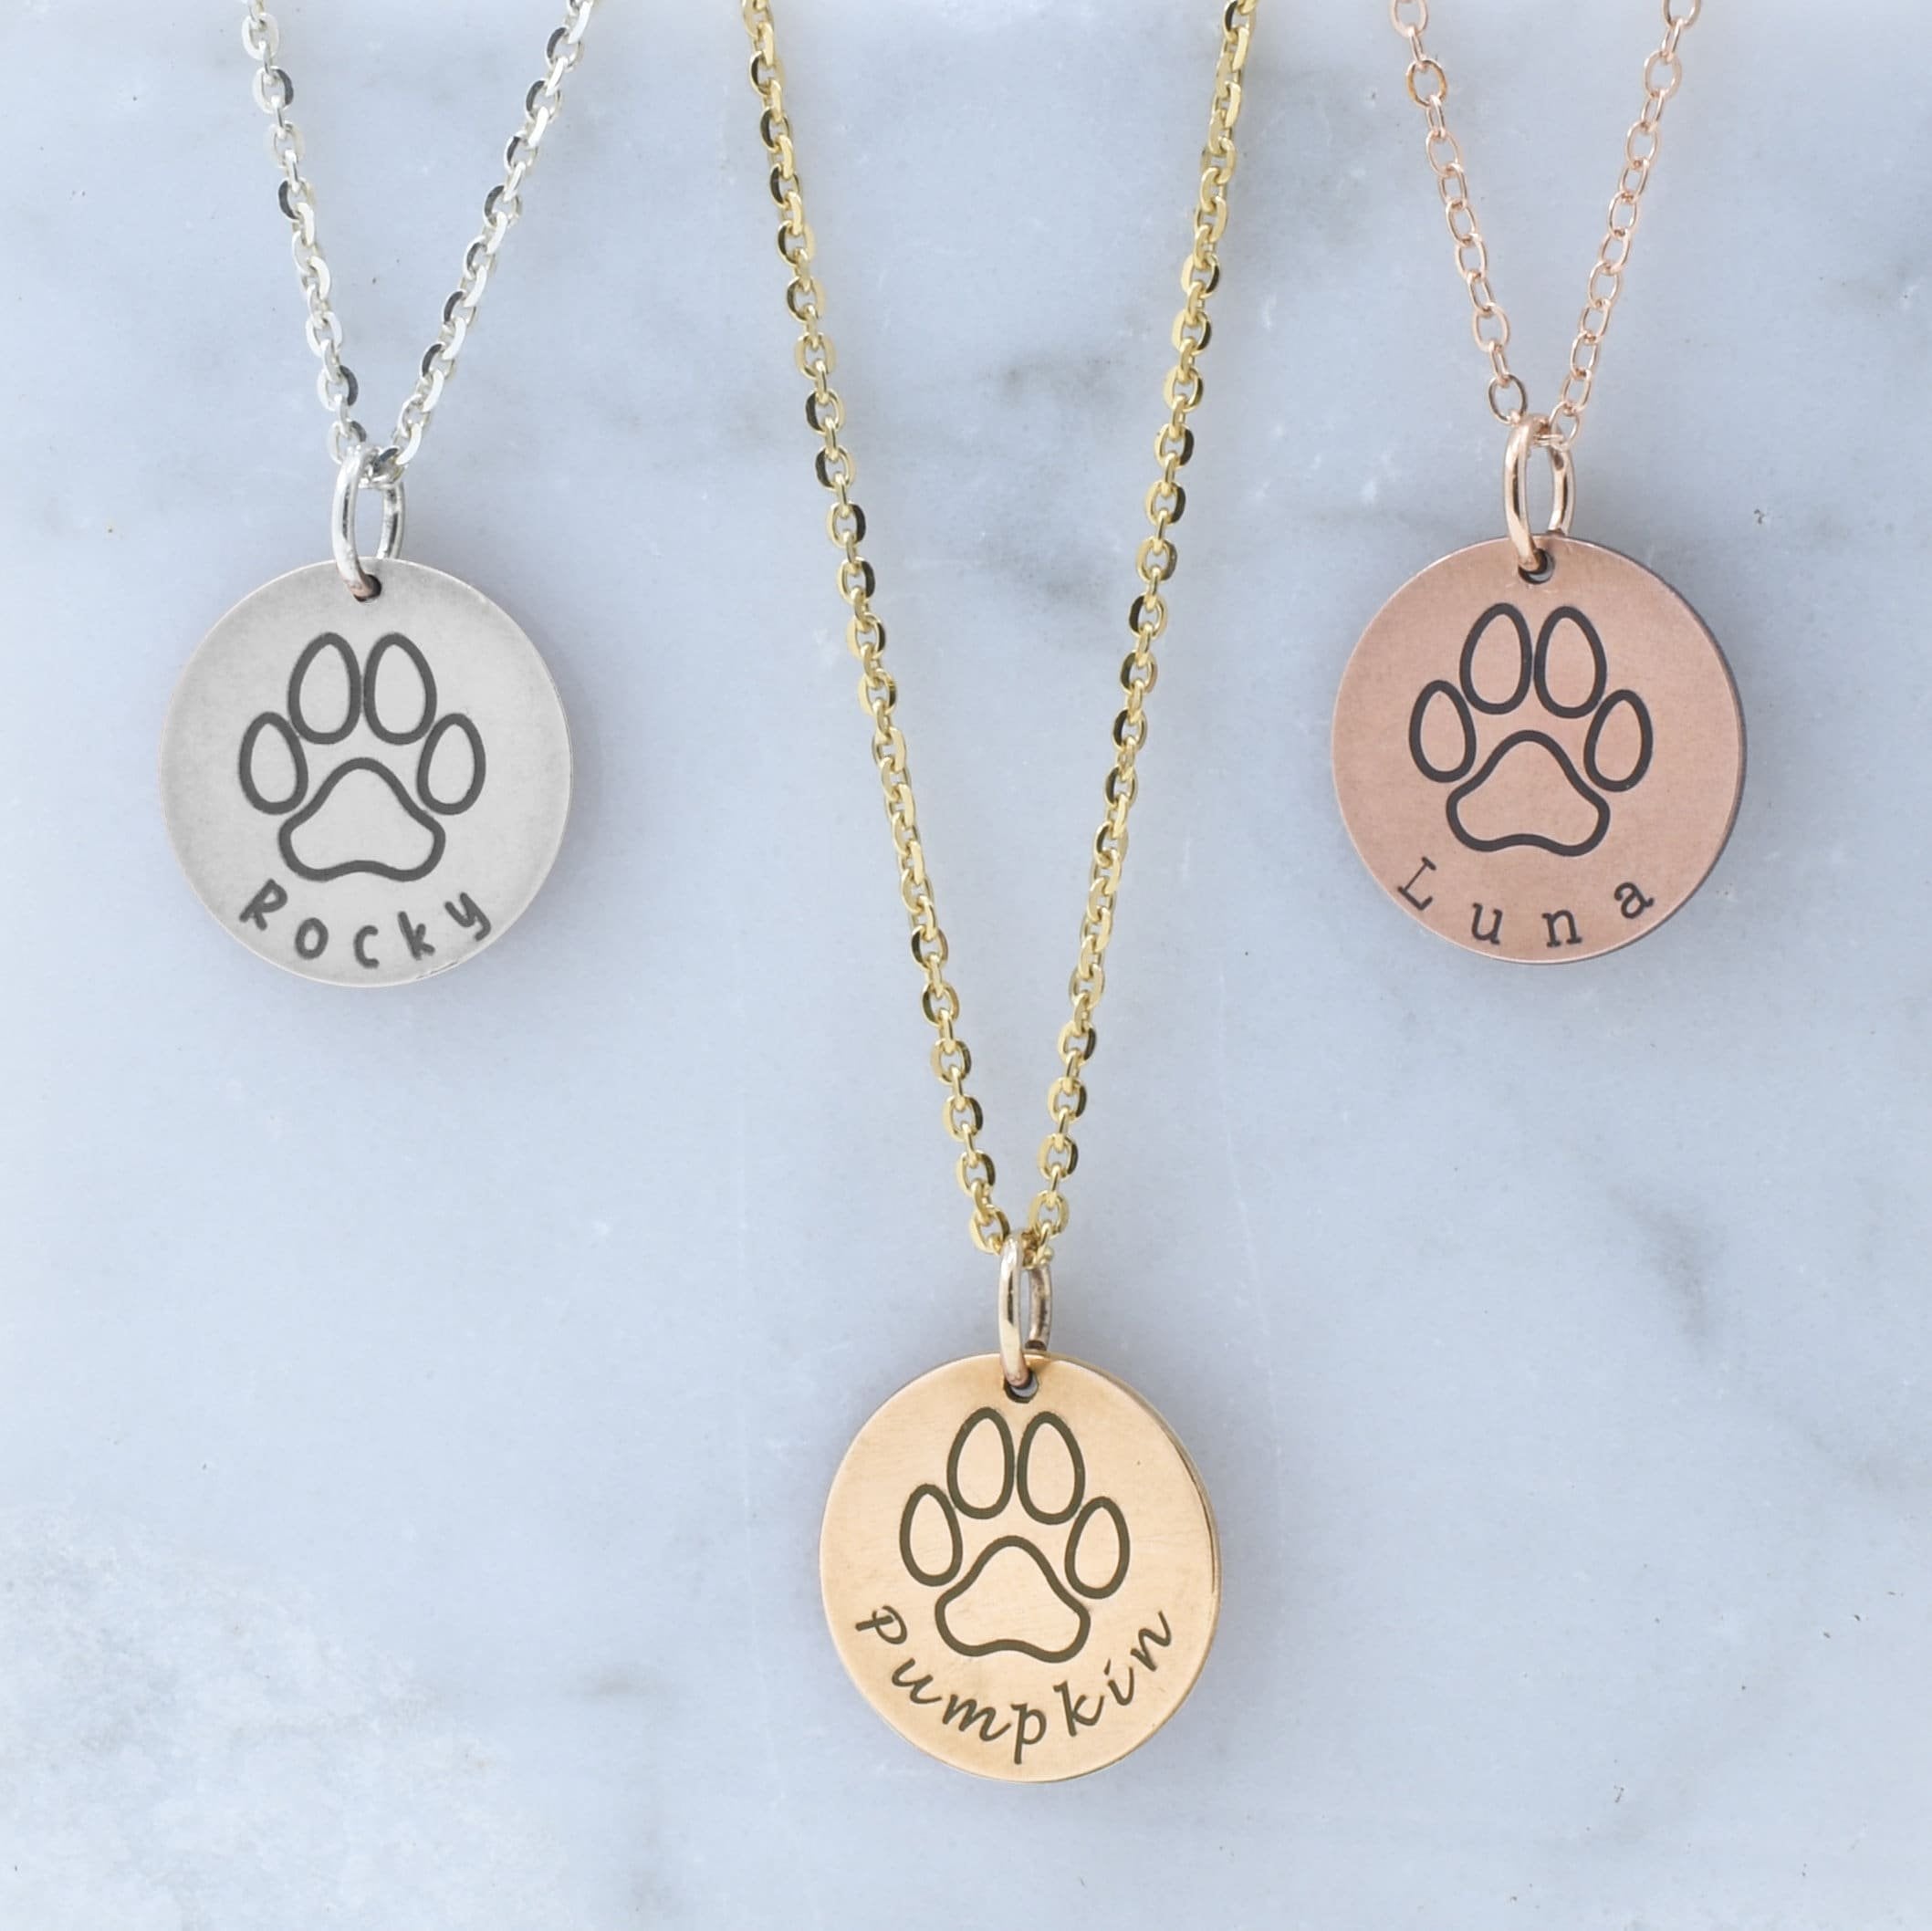 Paw Print Necklace Pendant Sterling Silver Cats and Dogs Paws Animal Jewelry  - Etsy | Style gioielli, Monili con animali, Collane